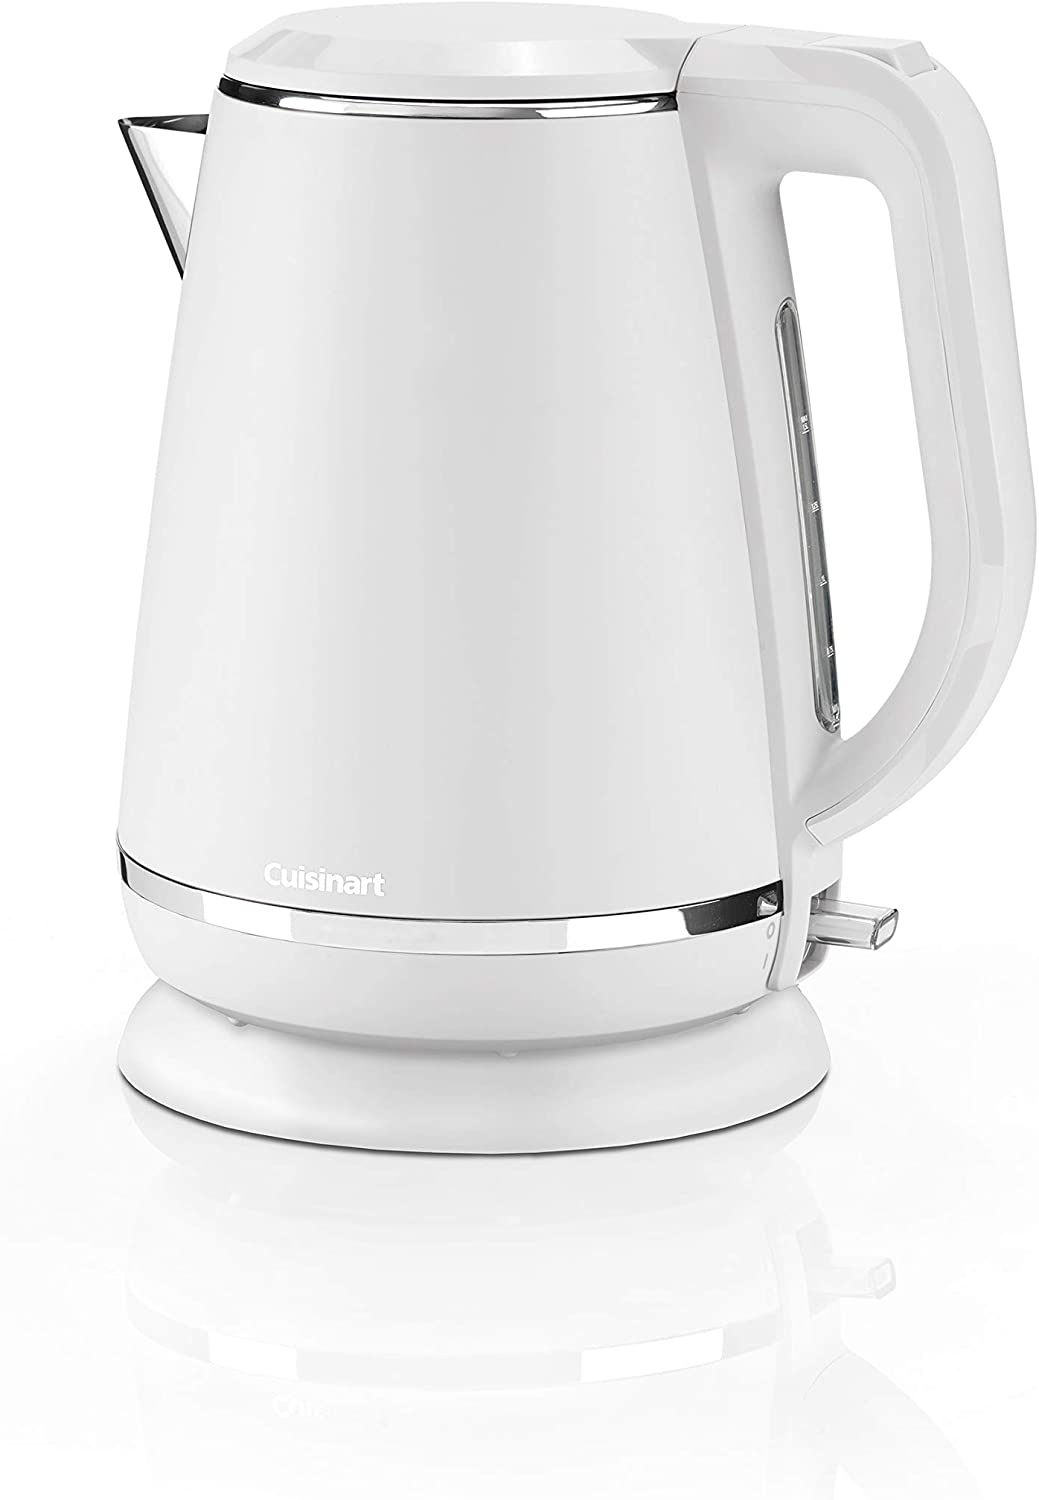 Cuisinart Kettle with 1.5 L capacity, 3 kW power for quick boiling, limescale water filter and 360° base, warm white, CJK429WE